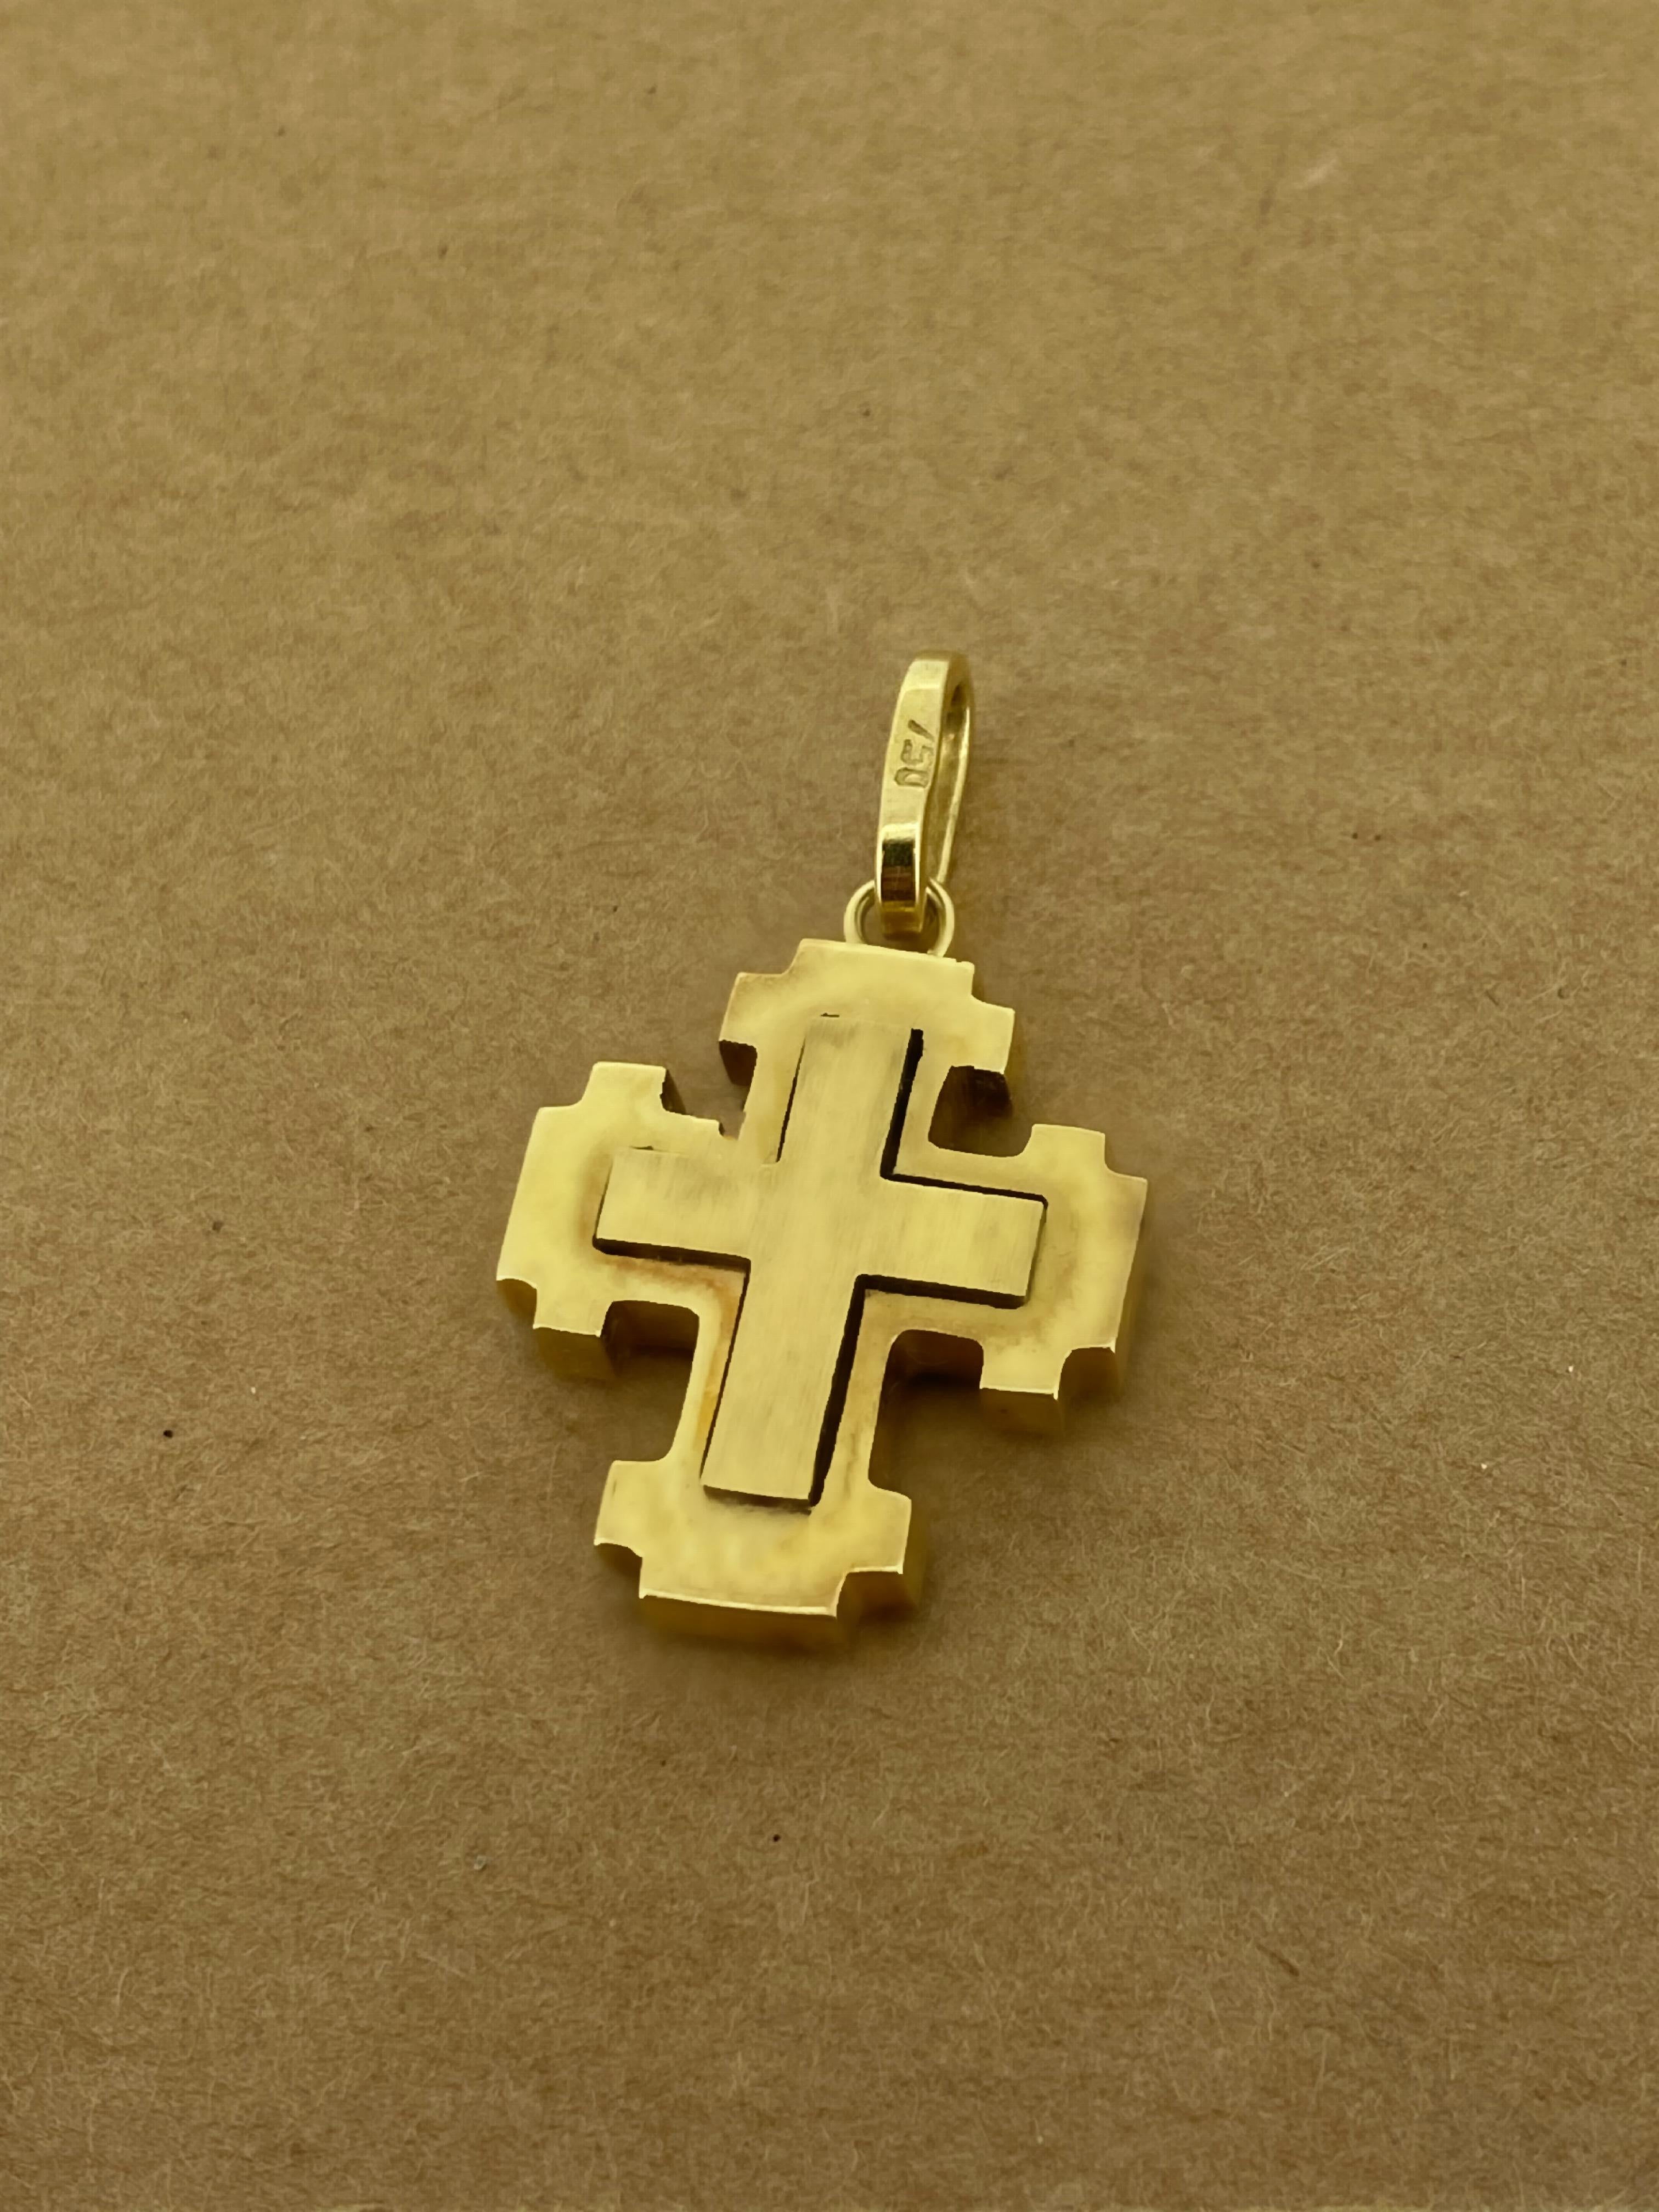 The pendant's design features a traditional Orthodox cross shape, 
making it a meaningful and symbolic accessory. 

Meticulously crafted in 18K yellow gold, 
beautifully detailed throughout 
this Orthodox cross/crucifix pendant is a vintage piece